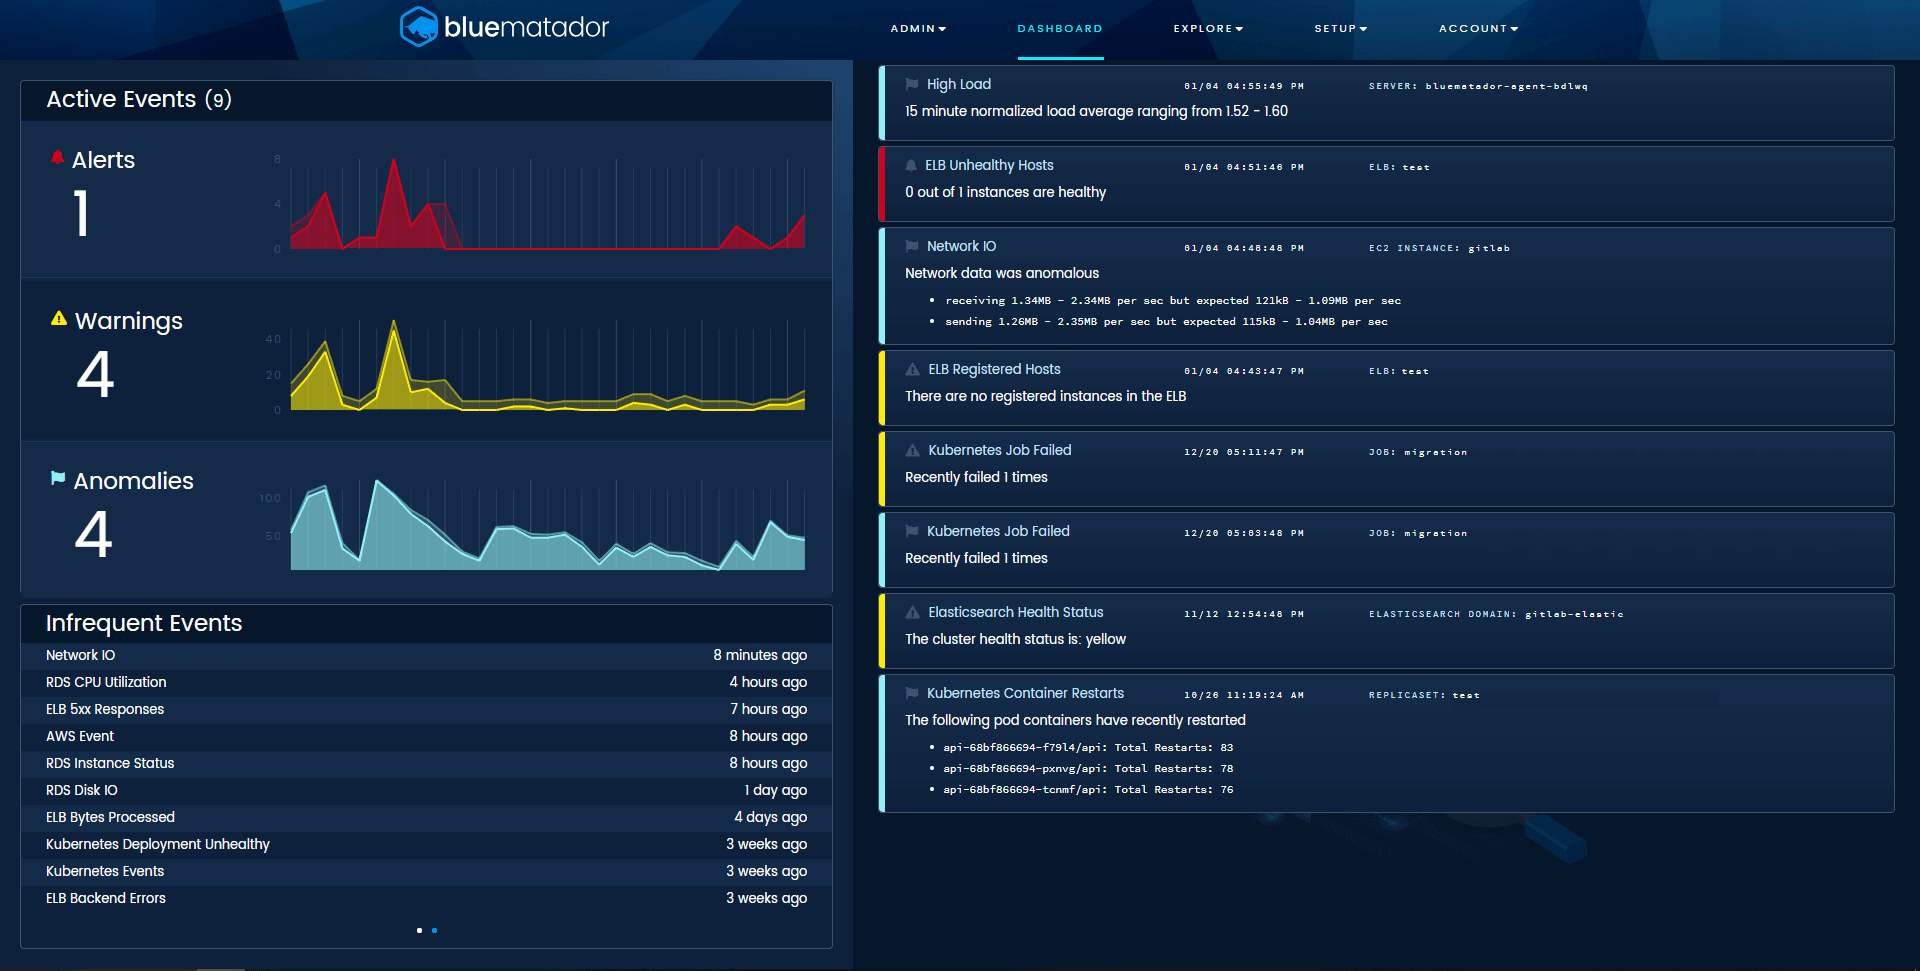 Blue Matador’s dashboard, showing active events, trends, and necessary information